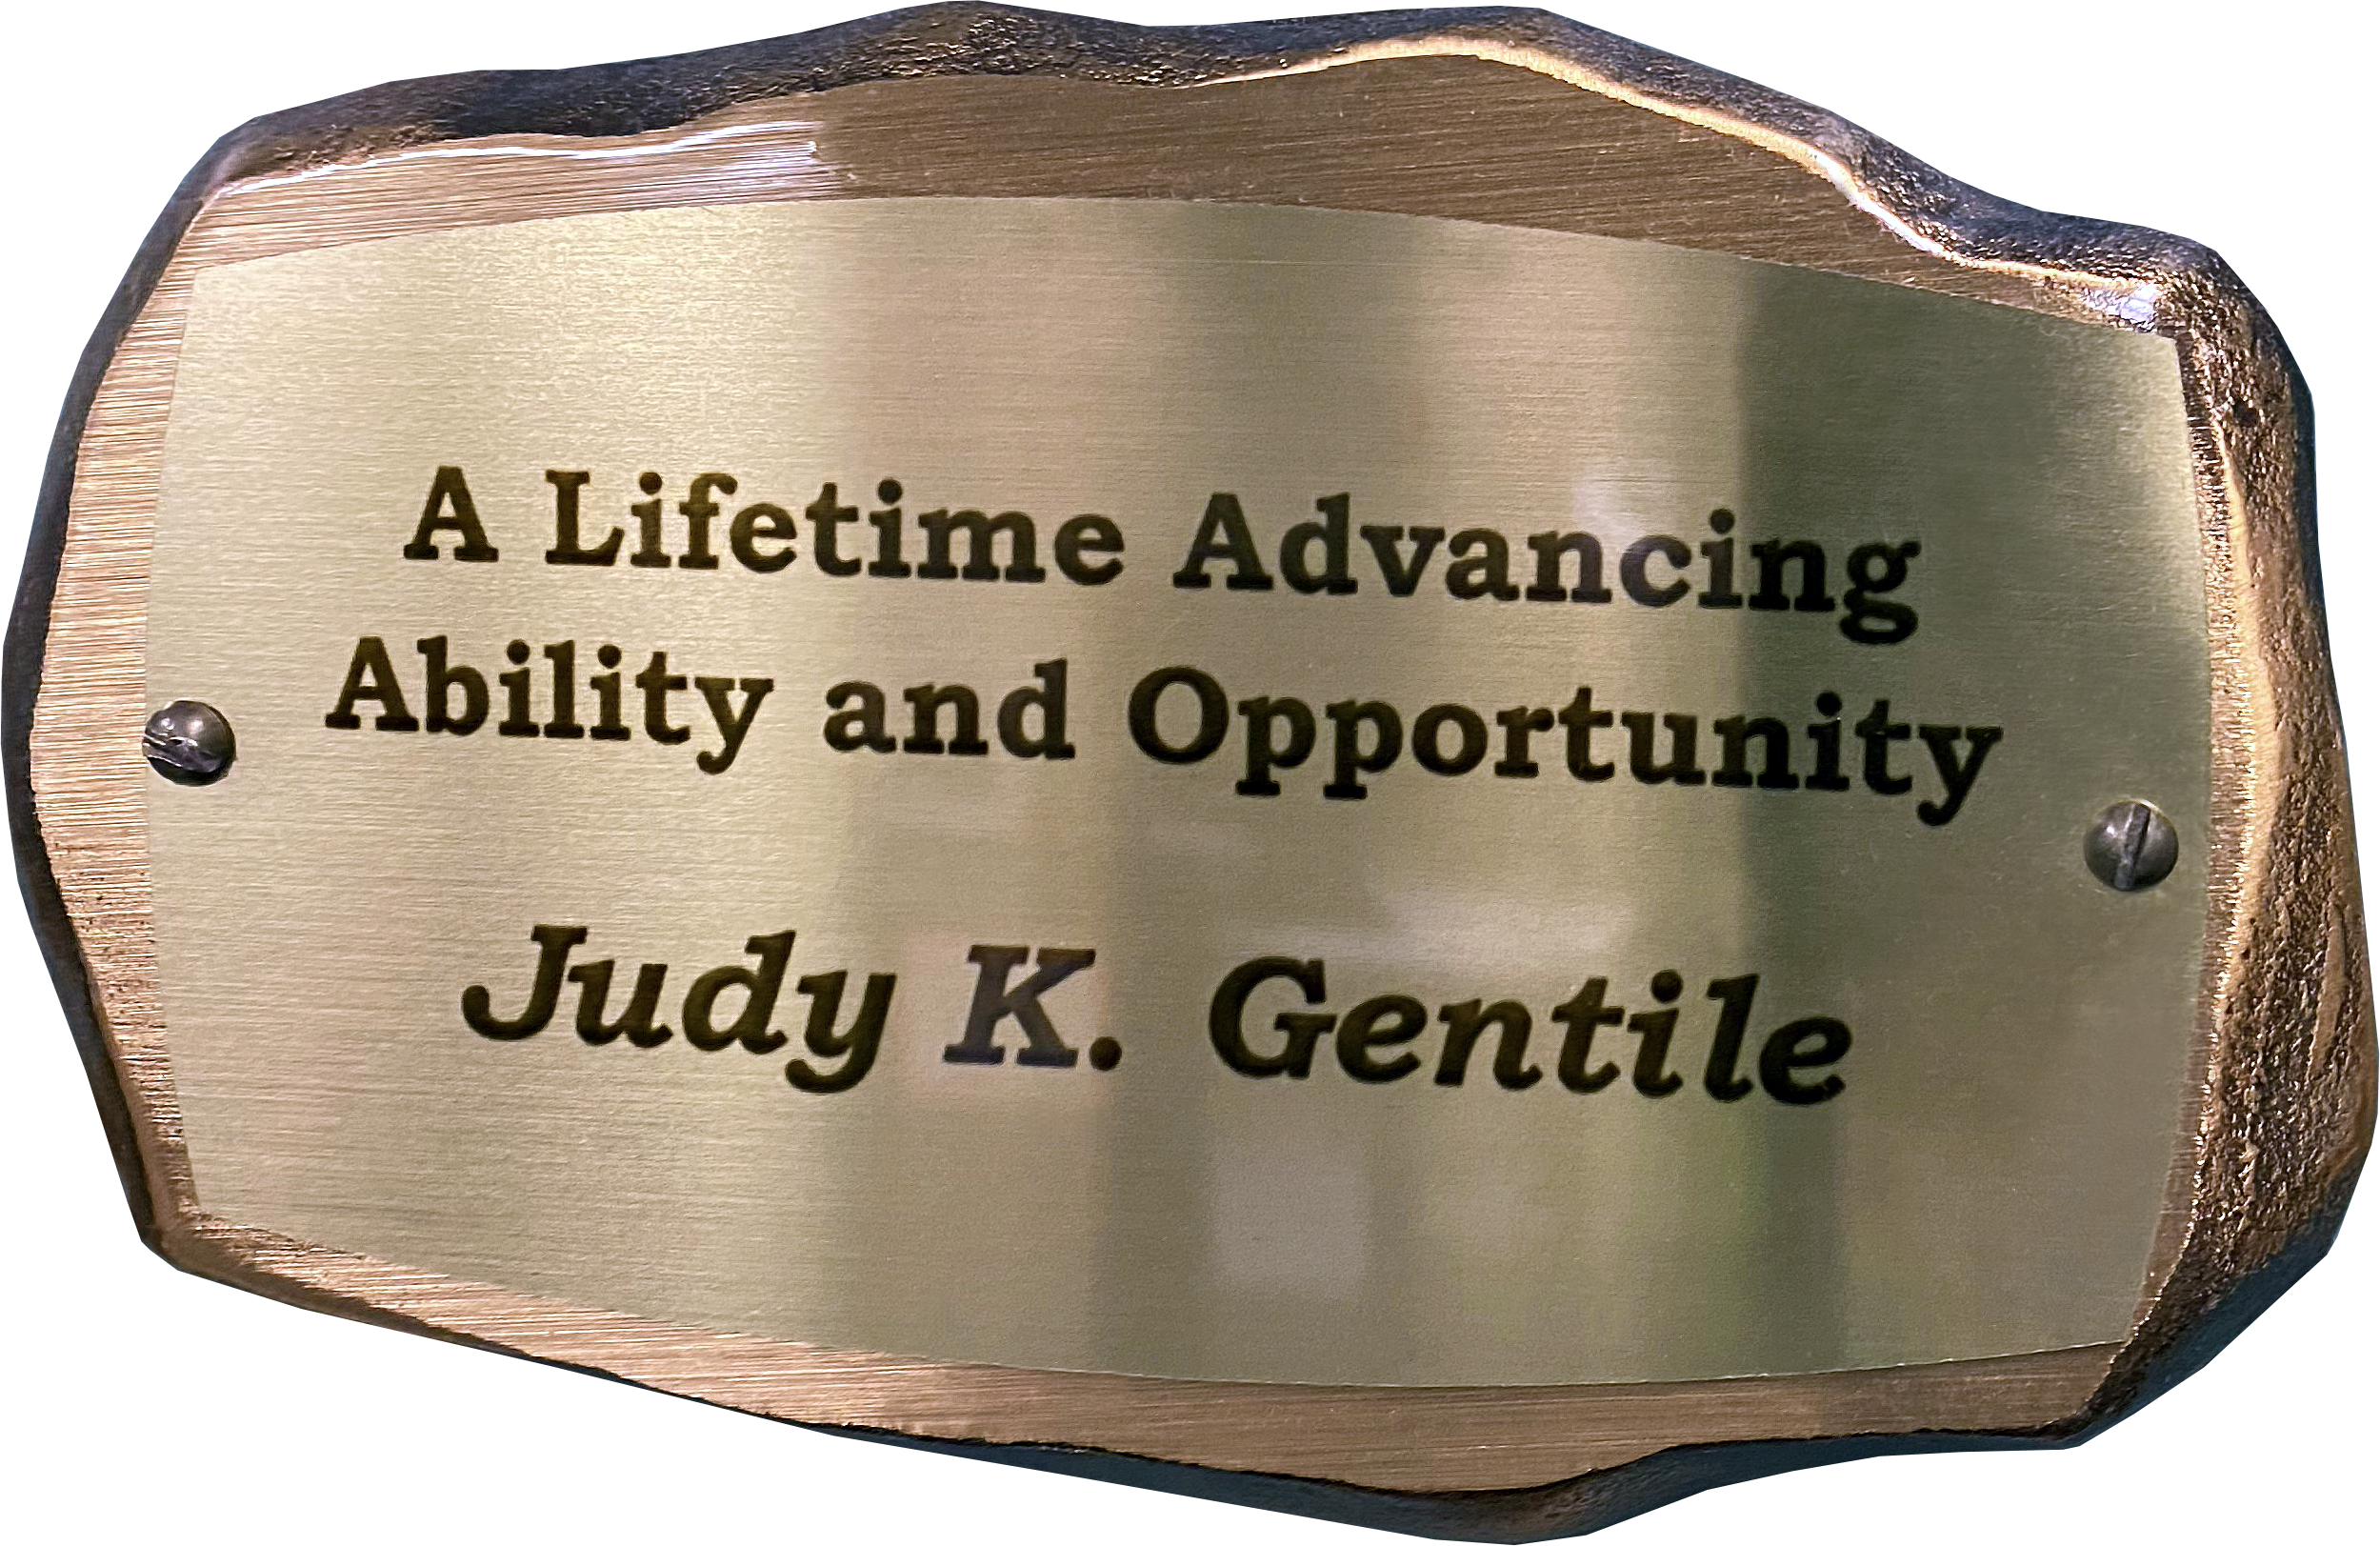 Inscribed bronze plaque in the shape of a rock with text on it reading: A Lifetime Advancing Ability and Opportunity. Judy K. Gentile